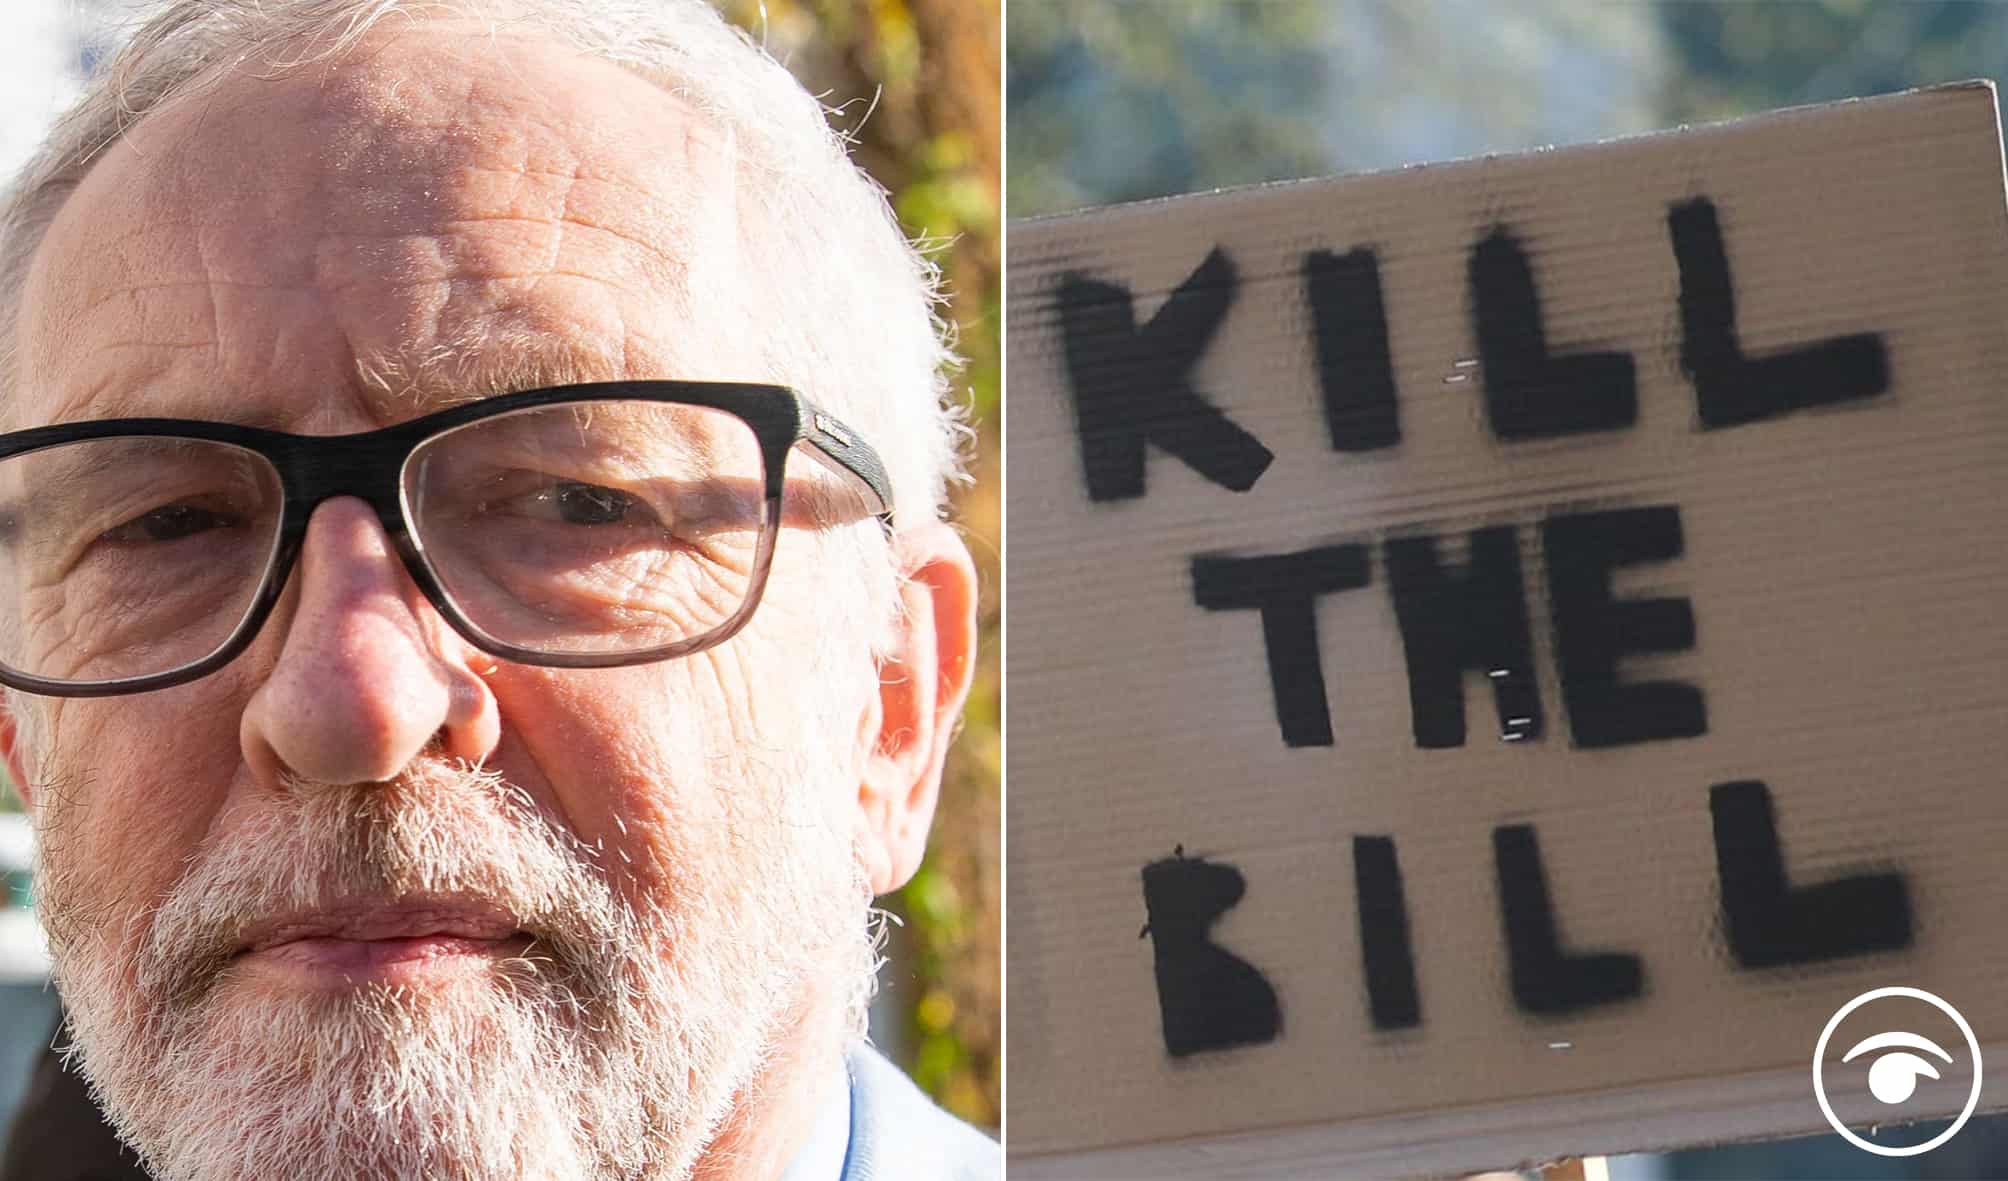 Watch – ‘If we don’t protest, things don’t change’ Corbyn tells ‘Kill the Bill’ protesters